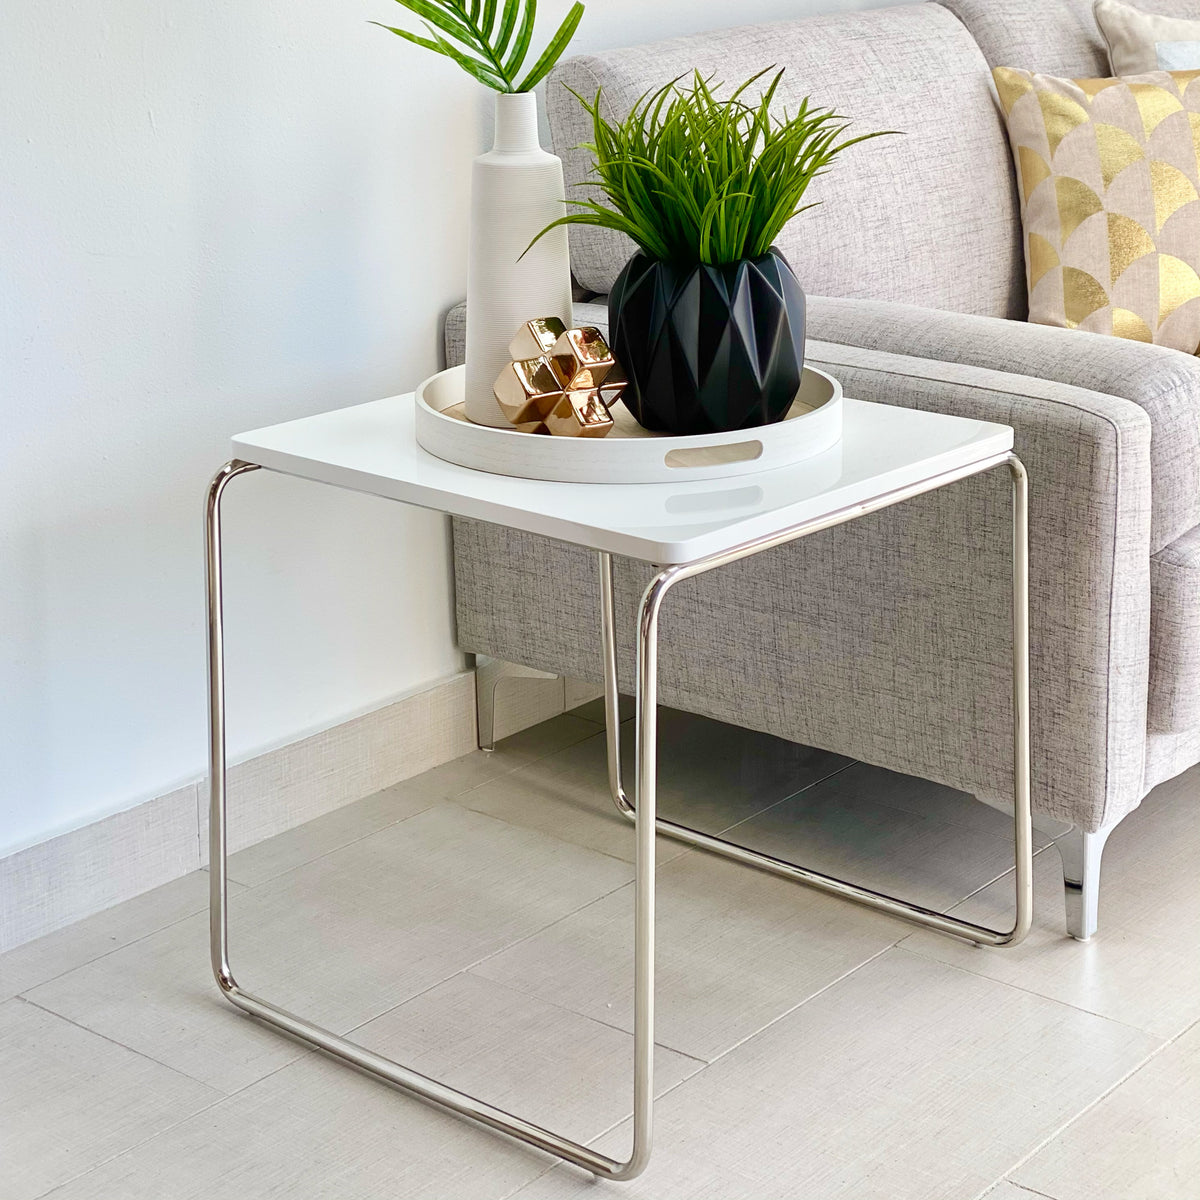 Square White Wooden End Table